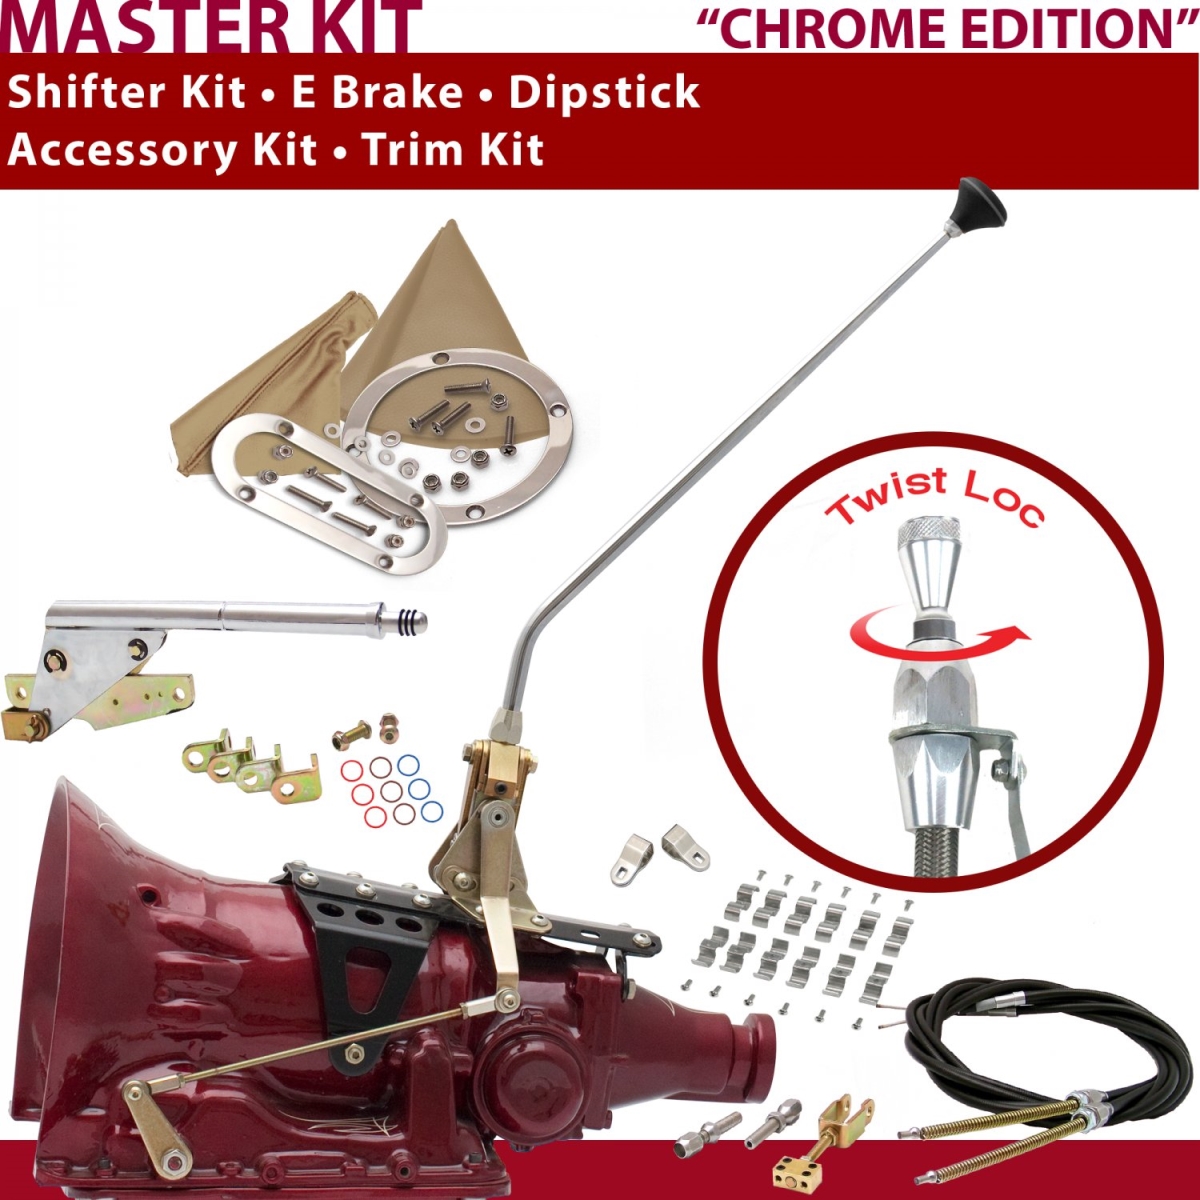 American Shifter 423291 TH200 Shifter Kit Chrome 16 in. E Brake Cable Clamp Clevis Trim Kit Dipstick for DB98D -  American Shifter Company